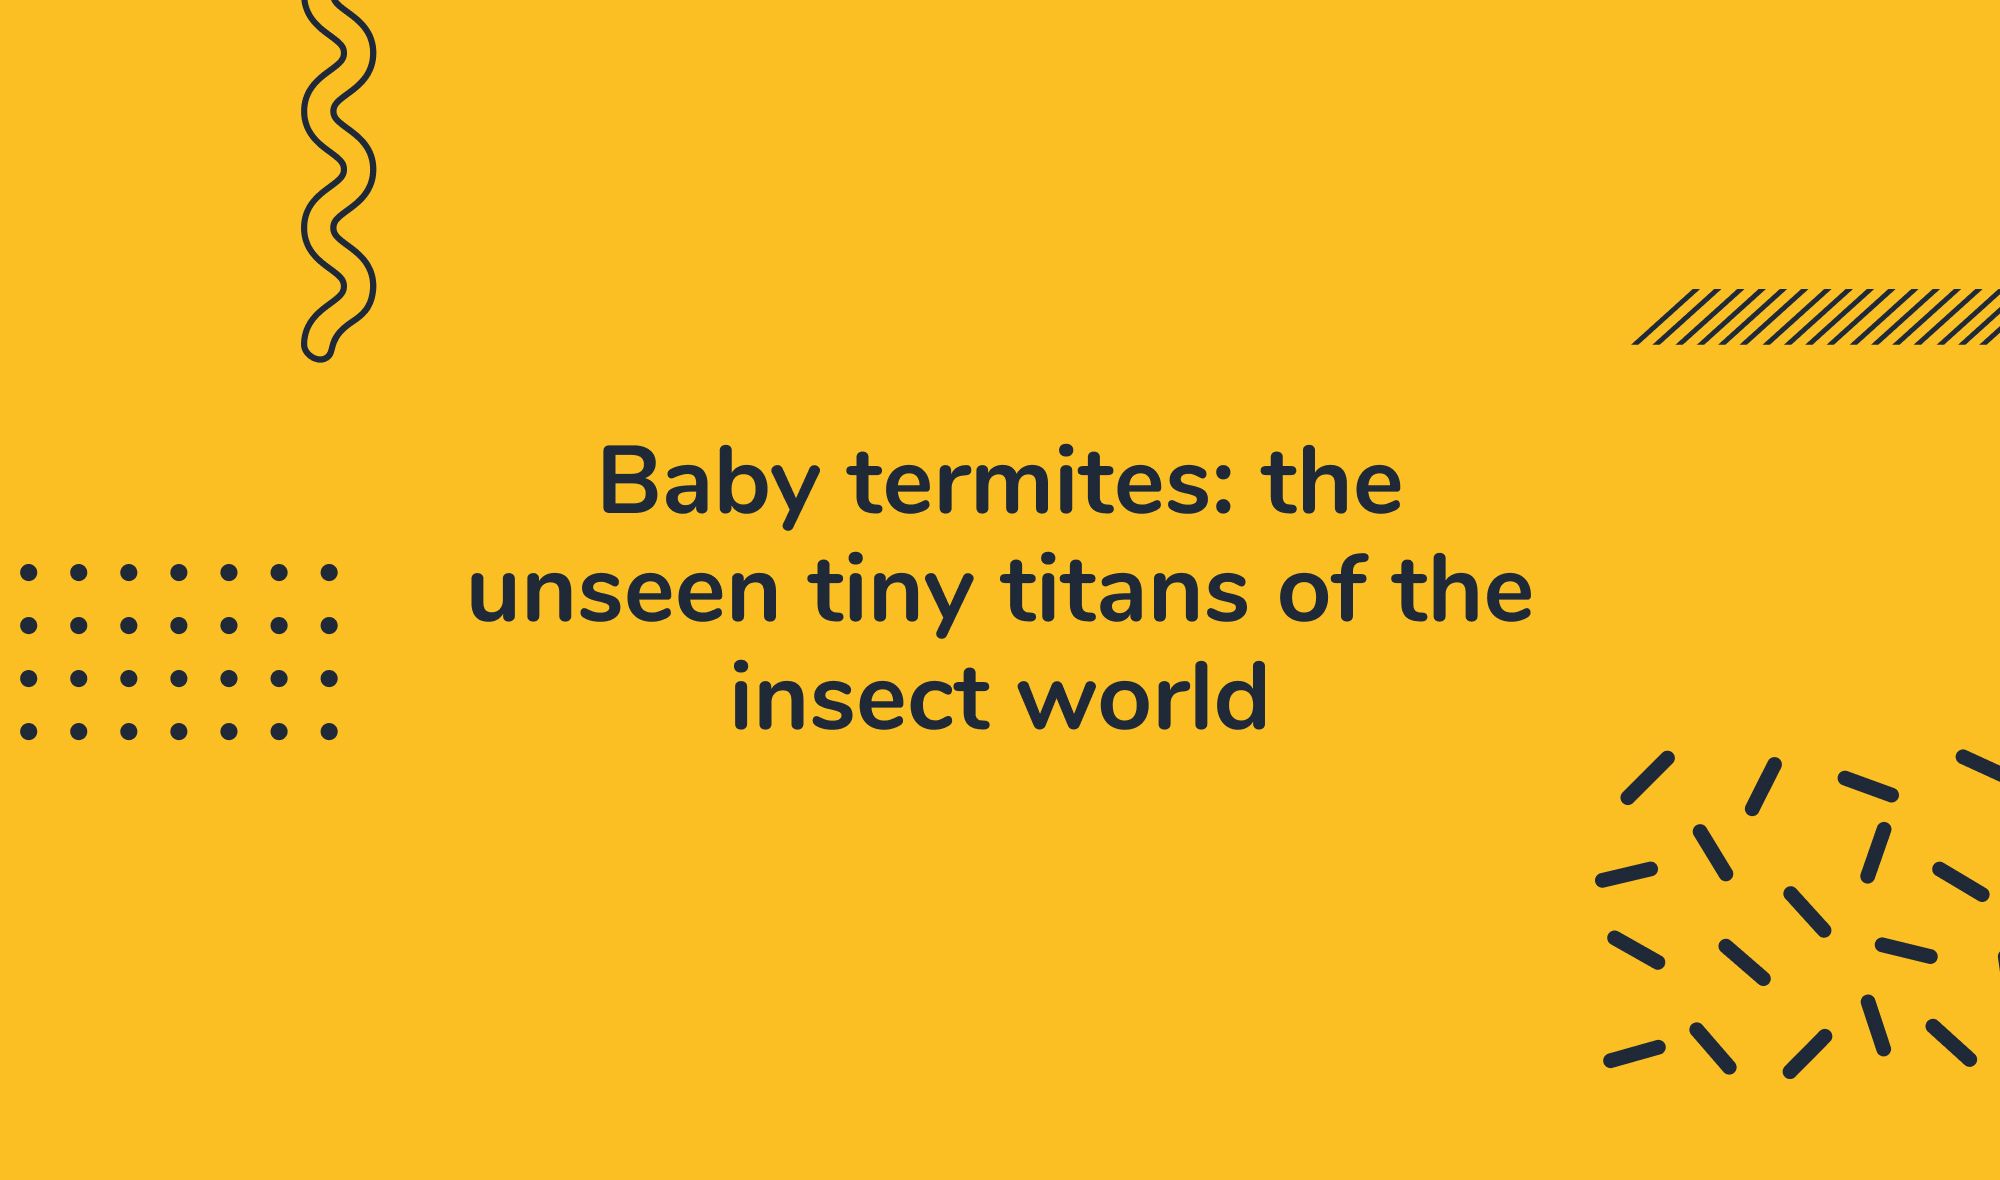 Baby termites: the unseen tiny titans of the insect world